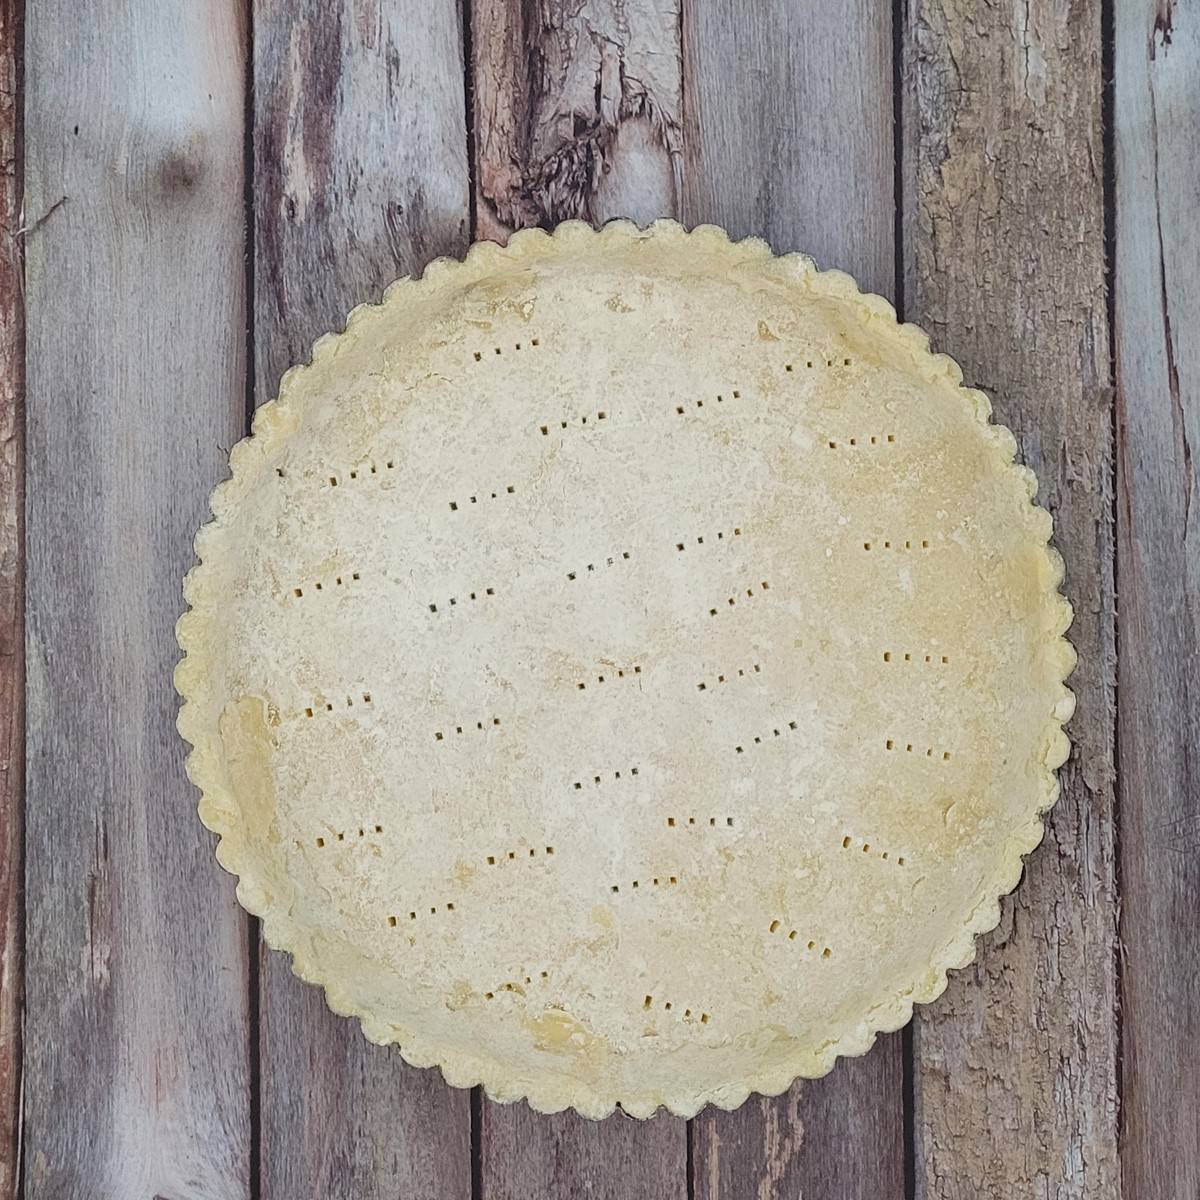 unbaked pie crust with holes poked in dough prior to par-baking